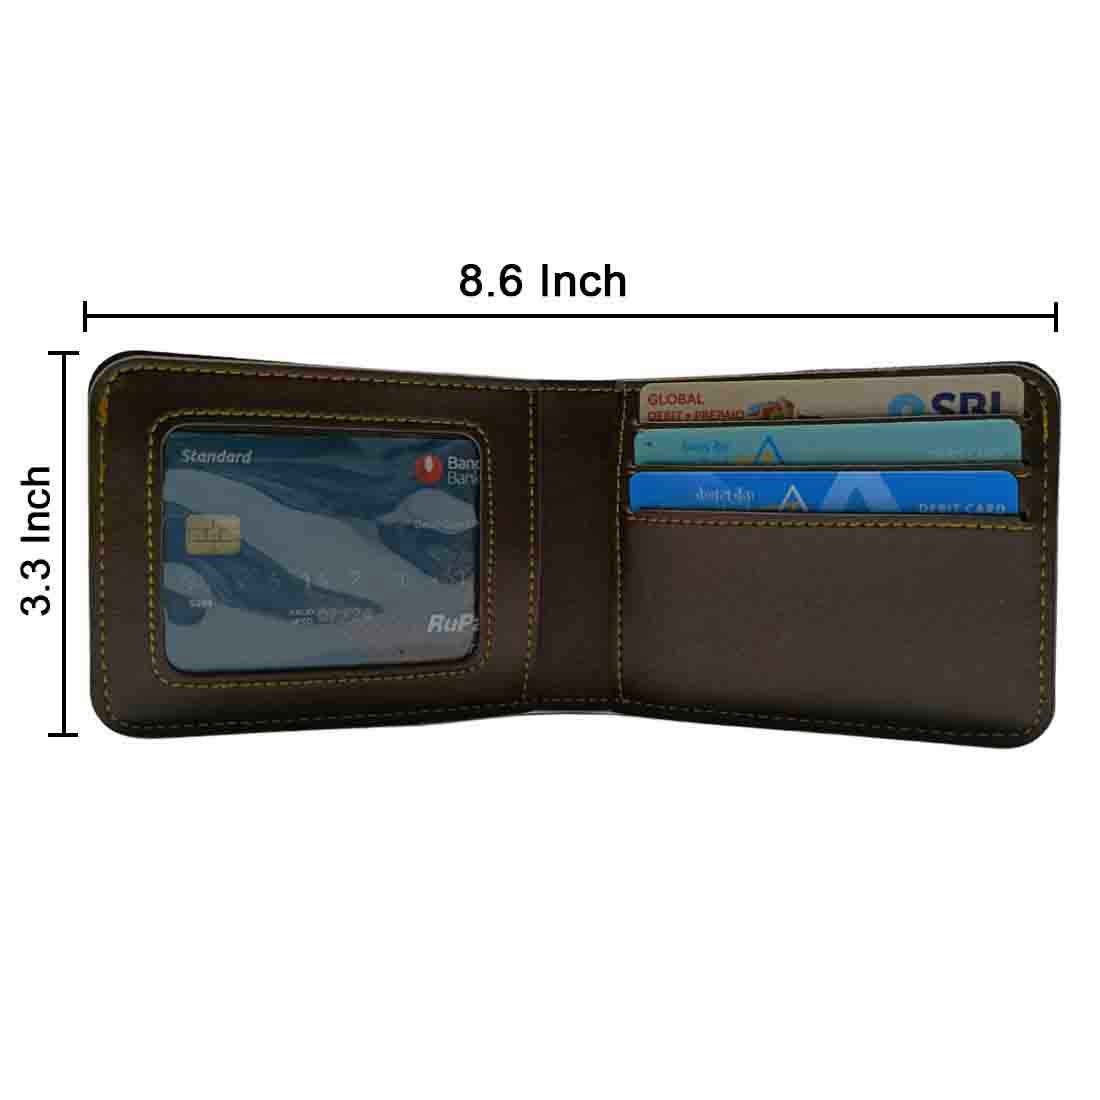 Men's Stylish leather Wallet With Tons of Pockets - Original Mens Purse  Genuine Leather Trifold Wallets for Boys (Brown) : Buy Online at Best Price  in KSA - Souq is now Amazon.sa: Fashion